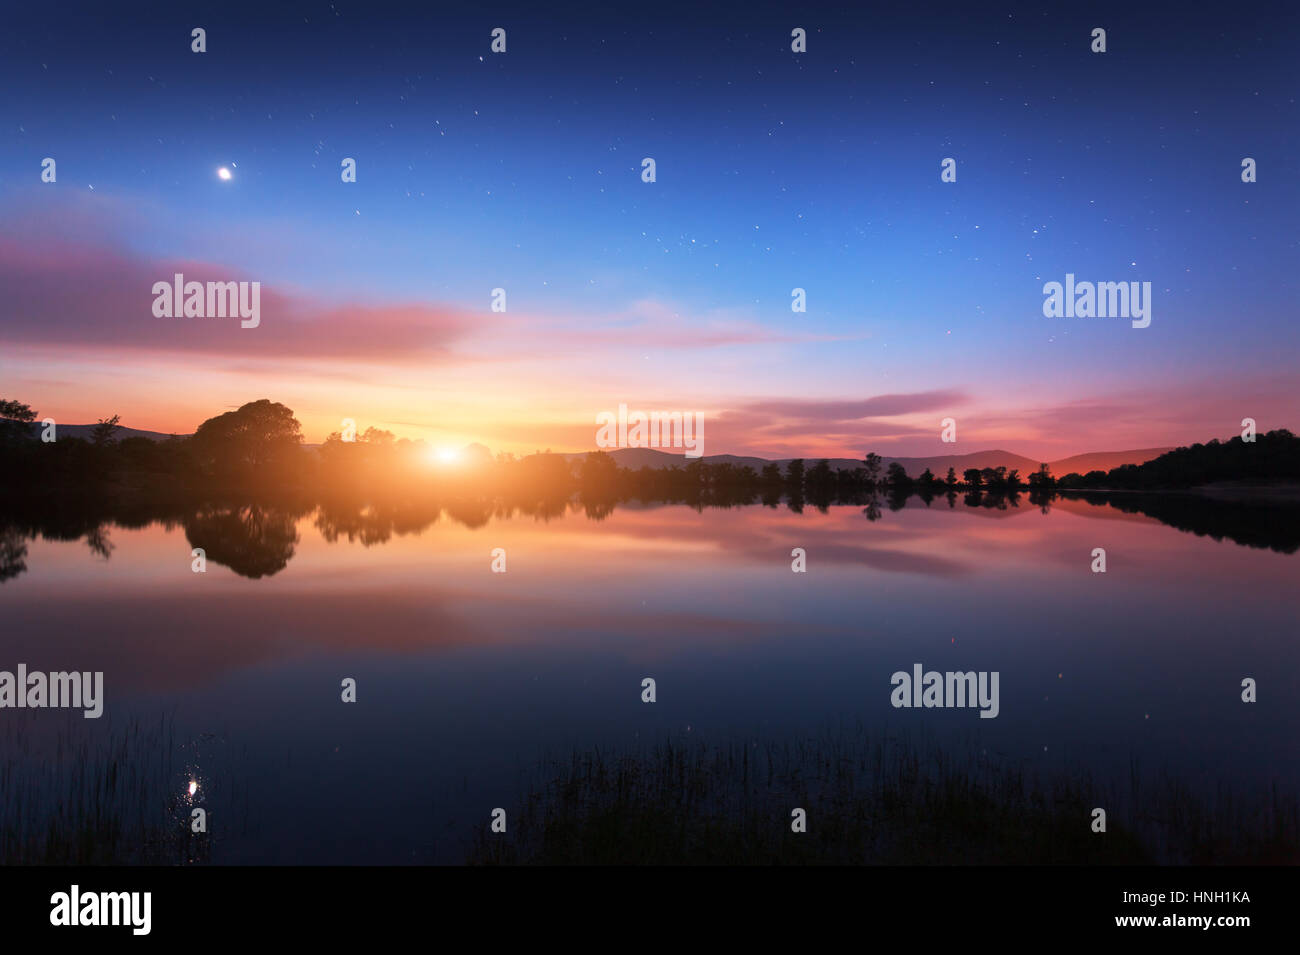 Mountain lake with moonrise at night. Night landscape with river, trees, hills, moon, stars and colorful blue sky with clouds reflected in water. Beau Stock Photo